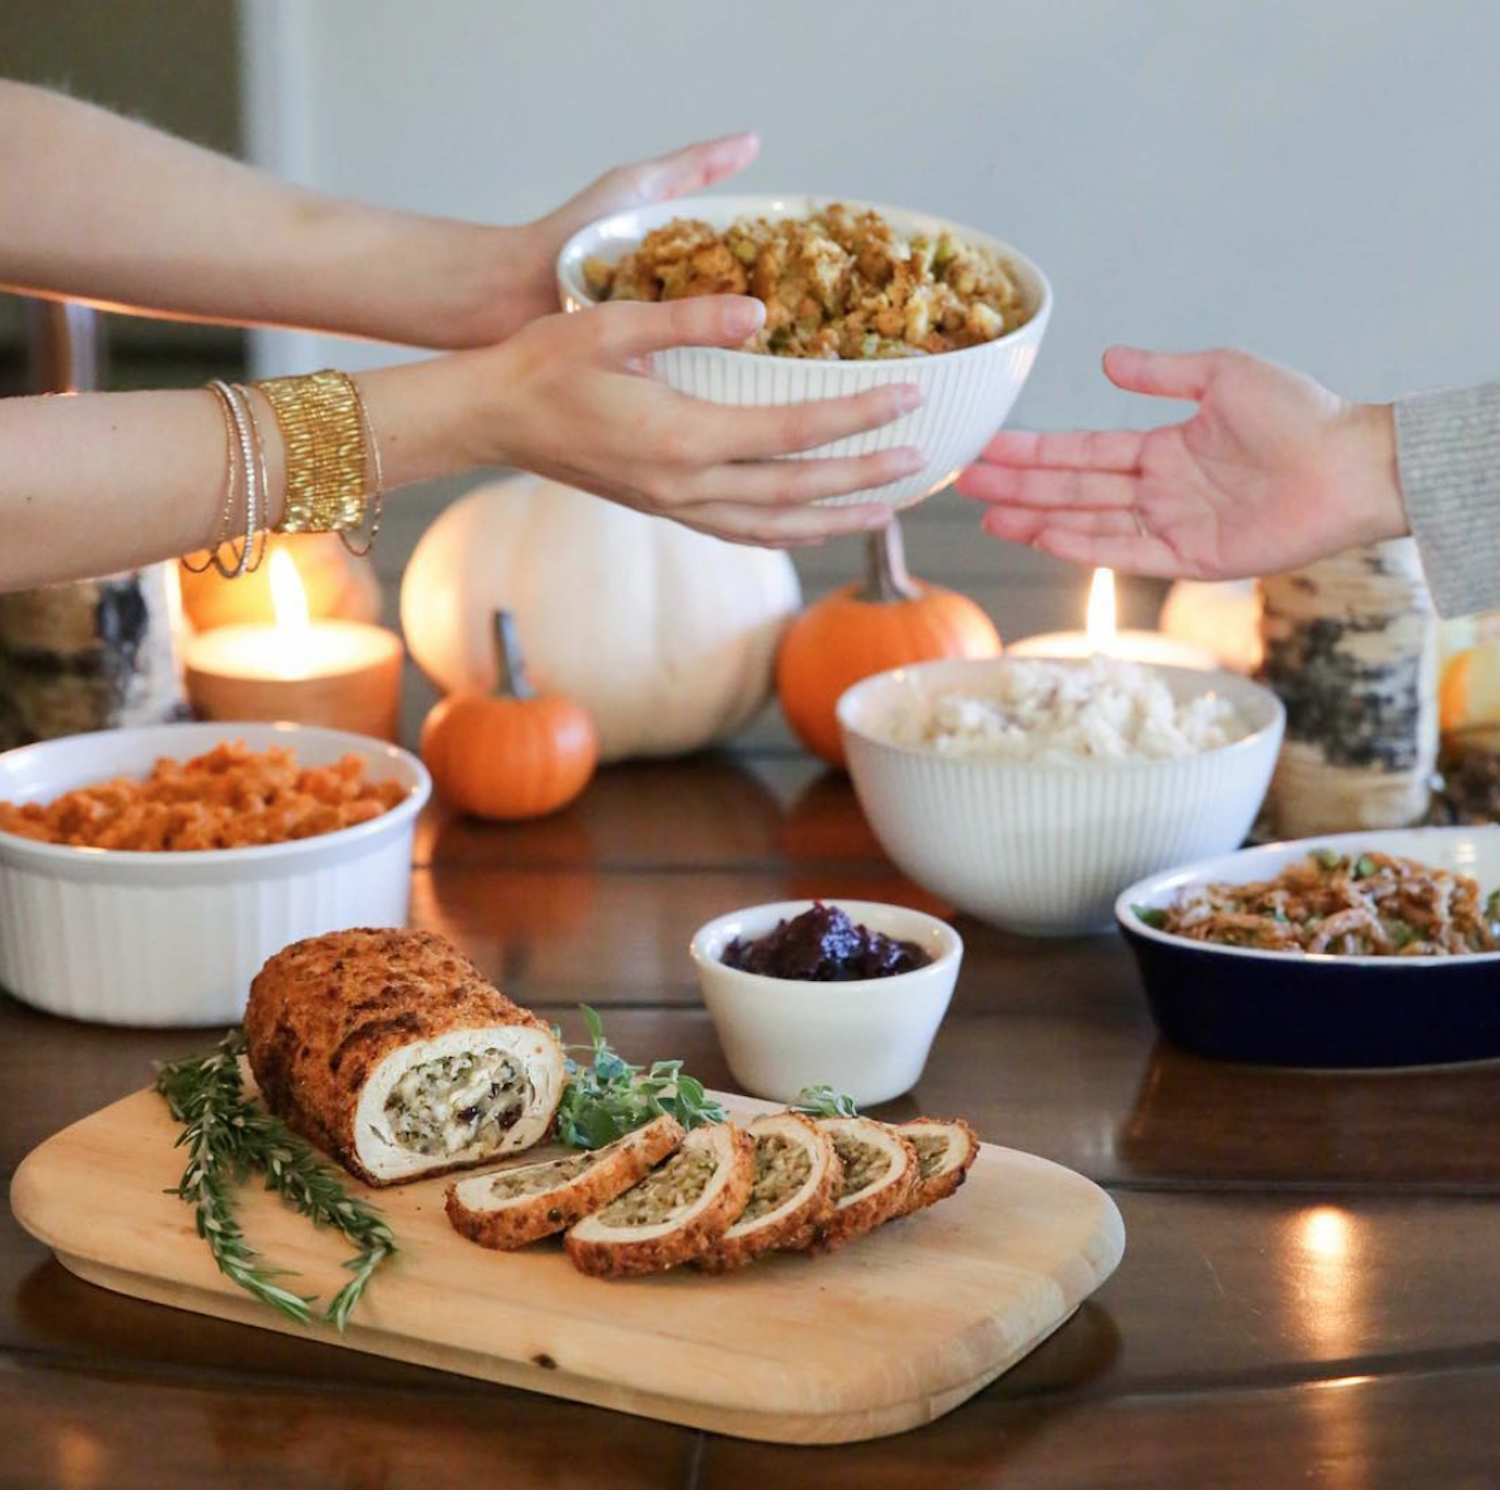 Give Thanks: Veggie Grill Just Launched a Loaded Vegan Thanksgiving Feast